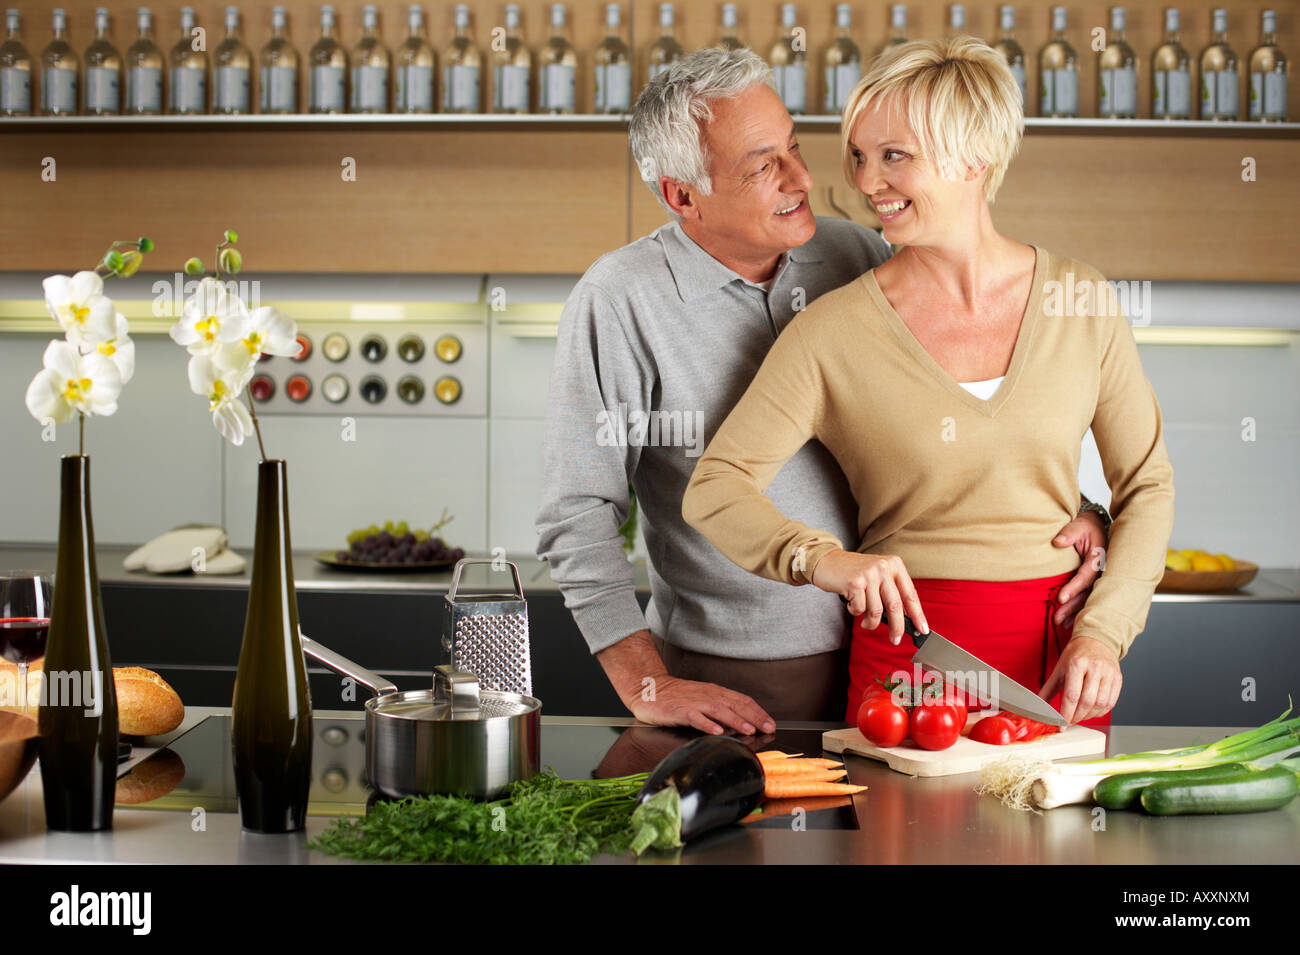 Blond woman and gray-haired man cooking together Stock Photo